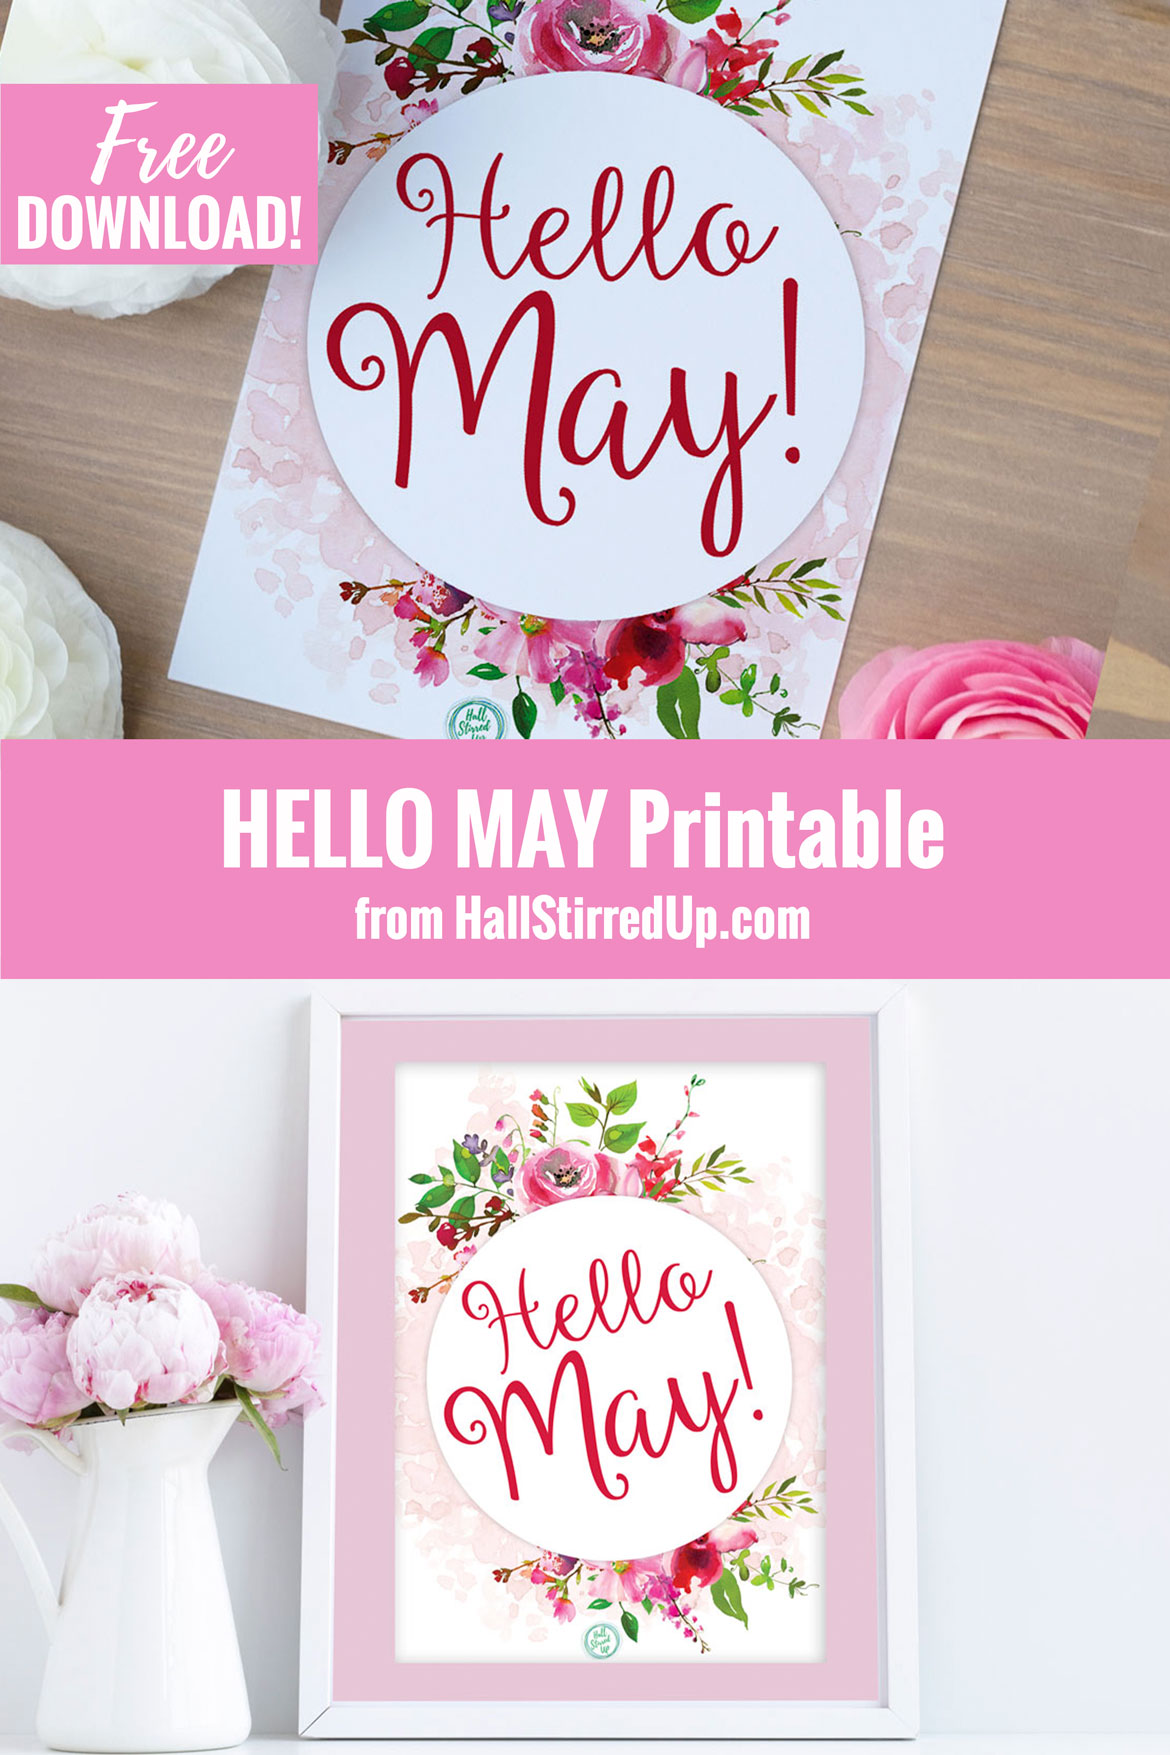 It's May and time for a pretty free printable!